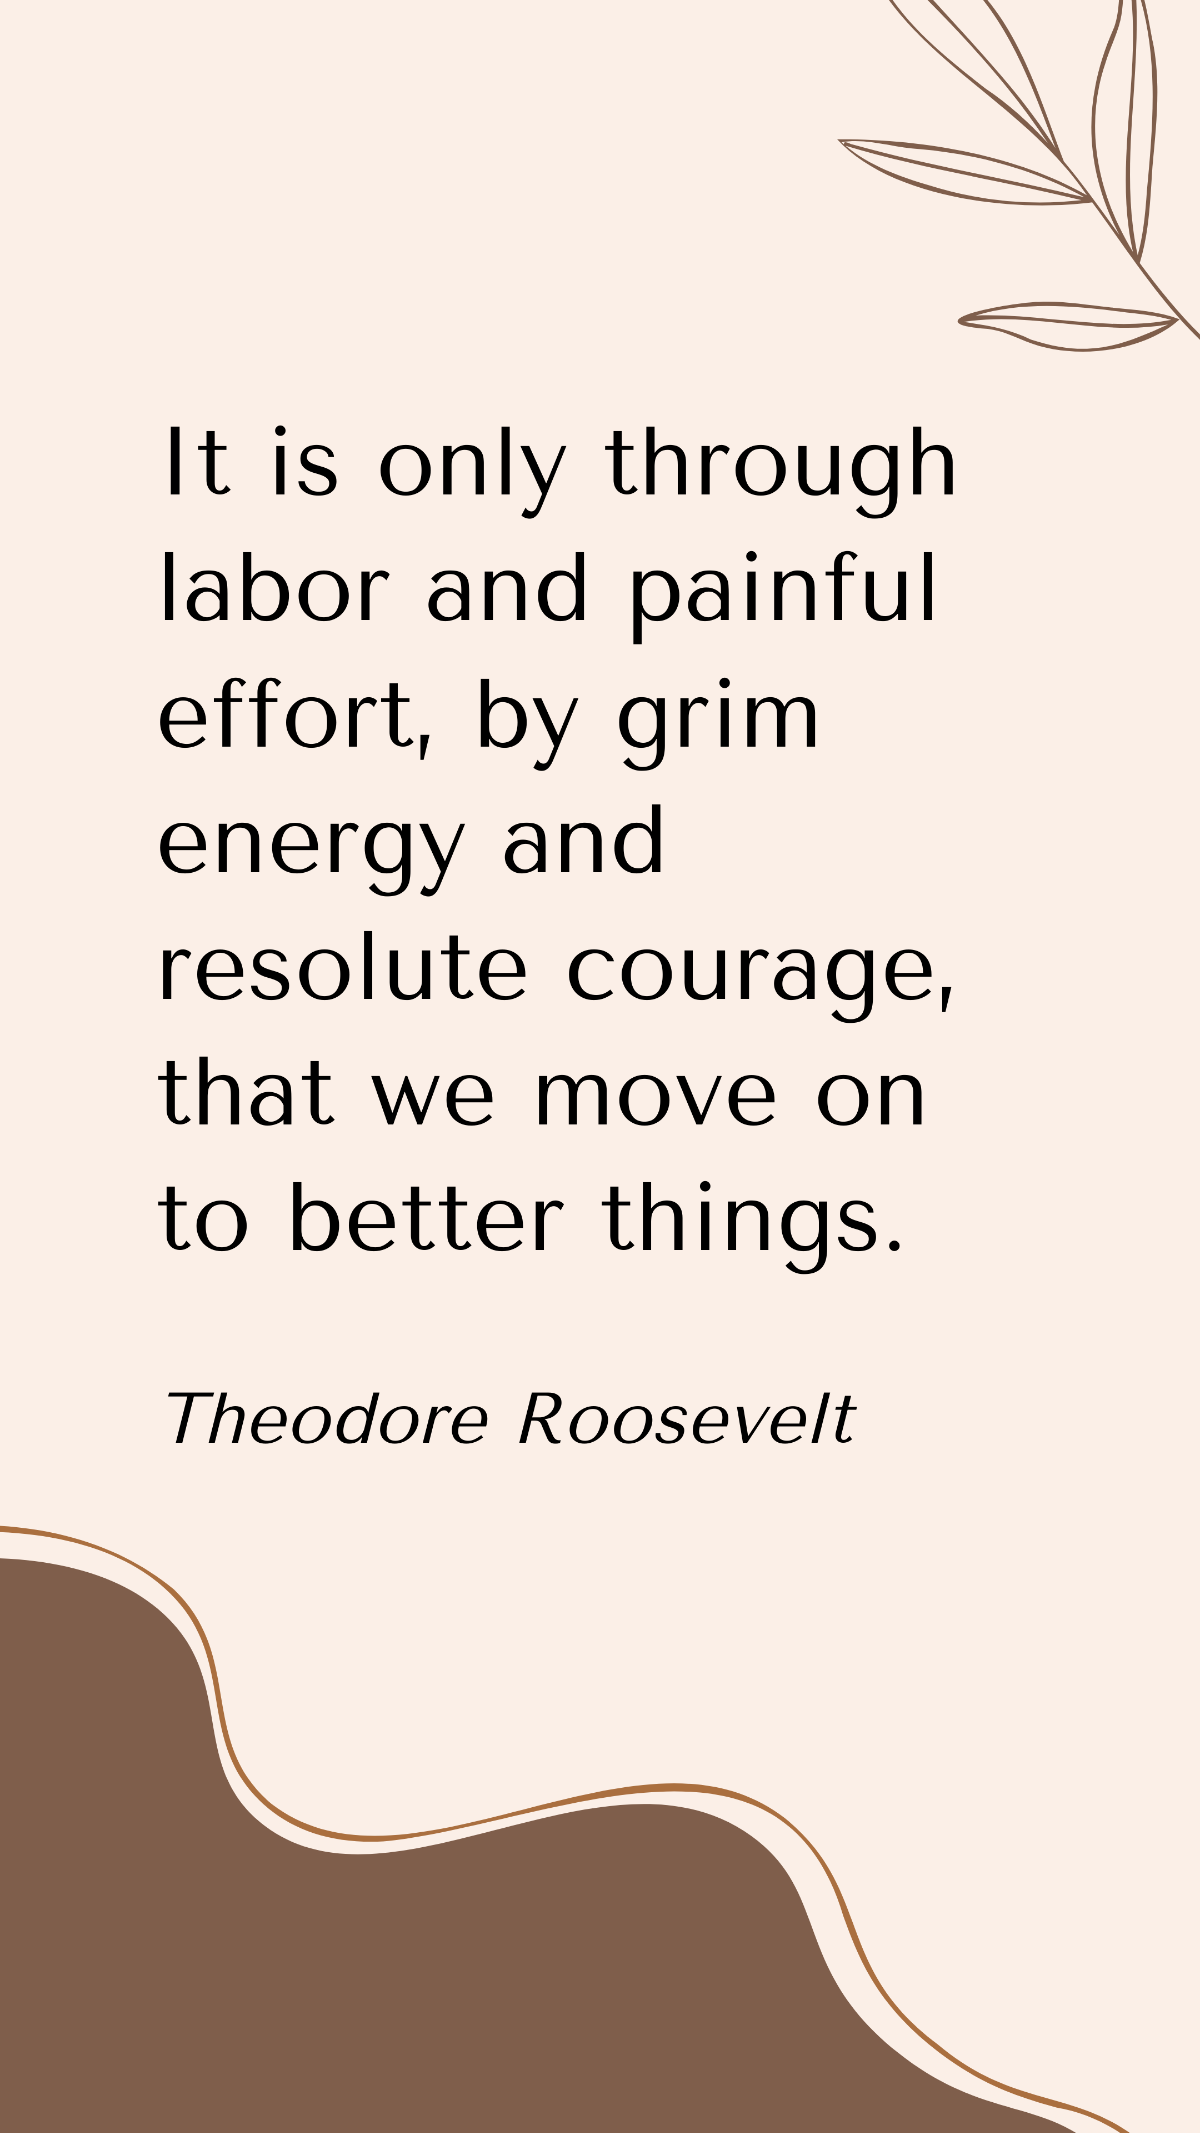 Theodore Roosevelt - It is only through labor and painful effort, by grim energy and resolute courage, that we move on to better things. Template